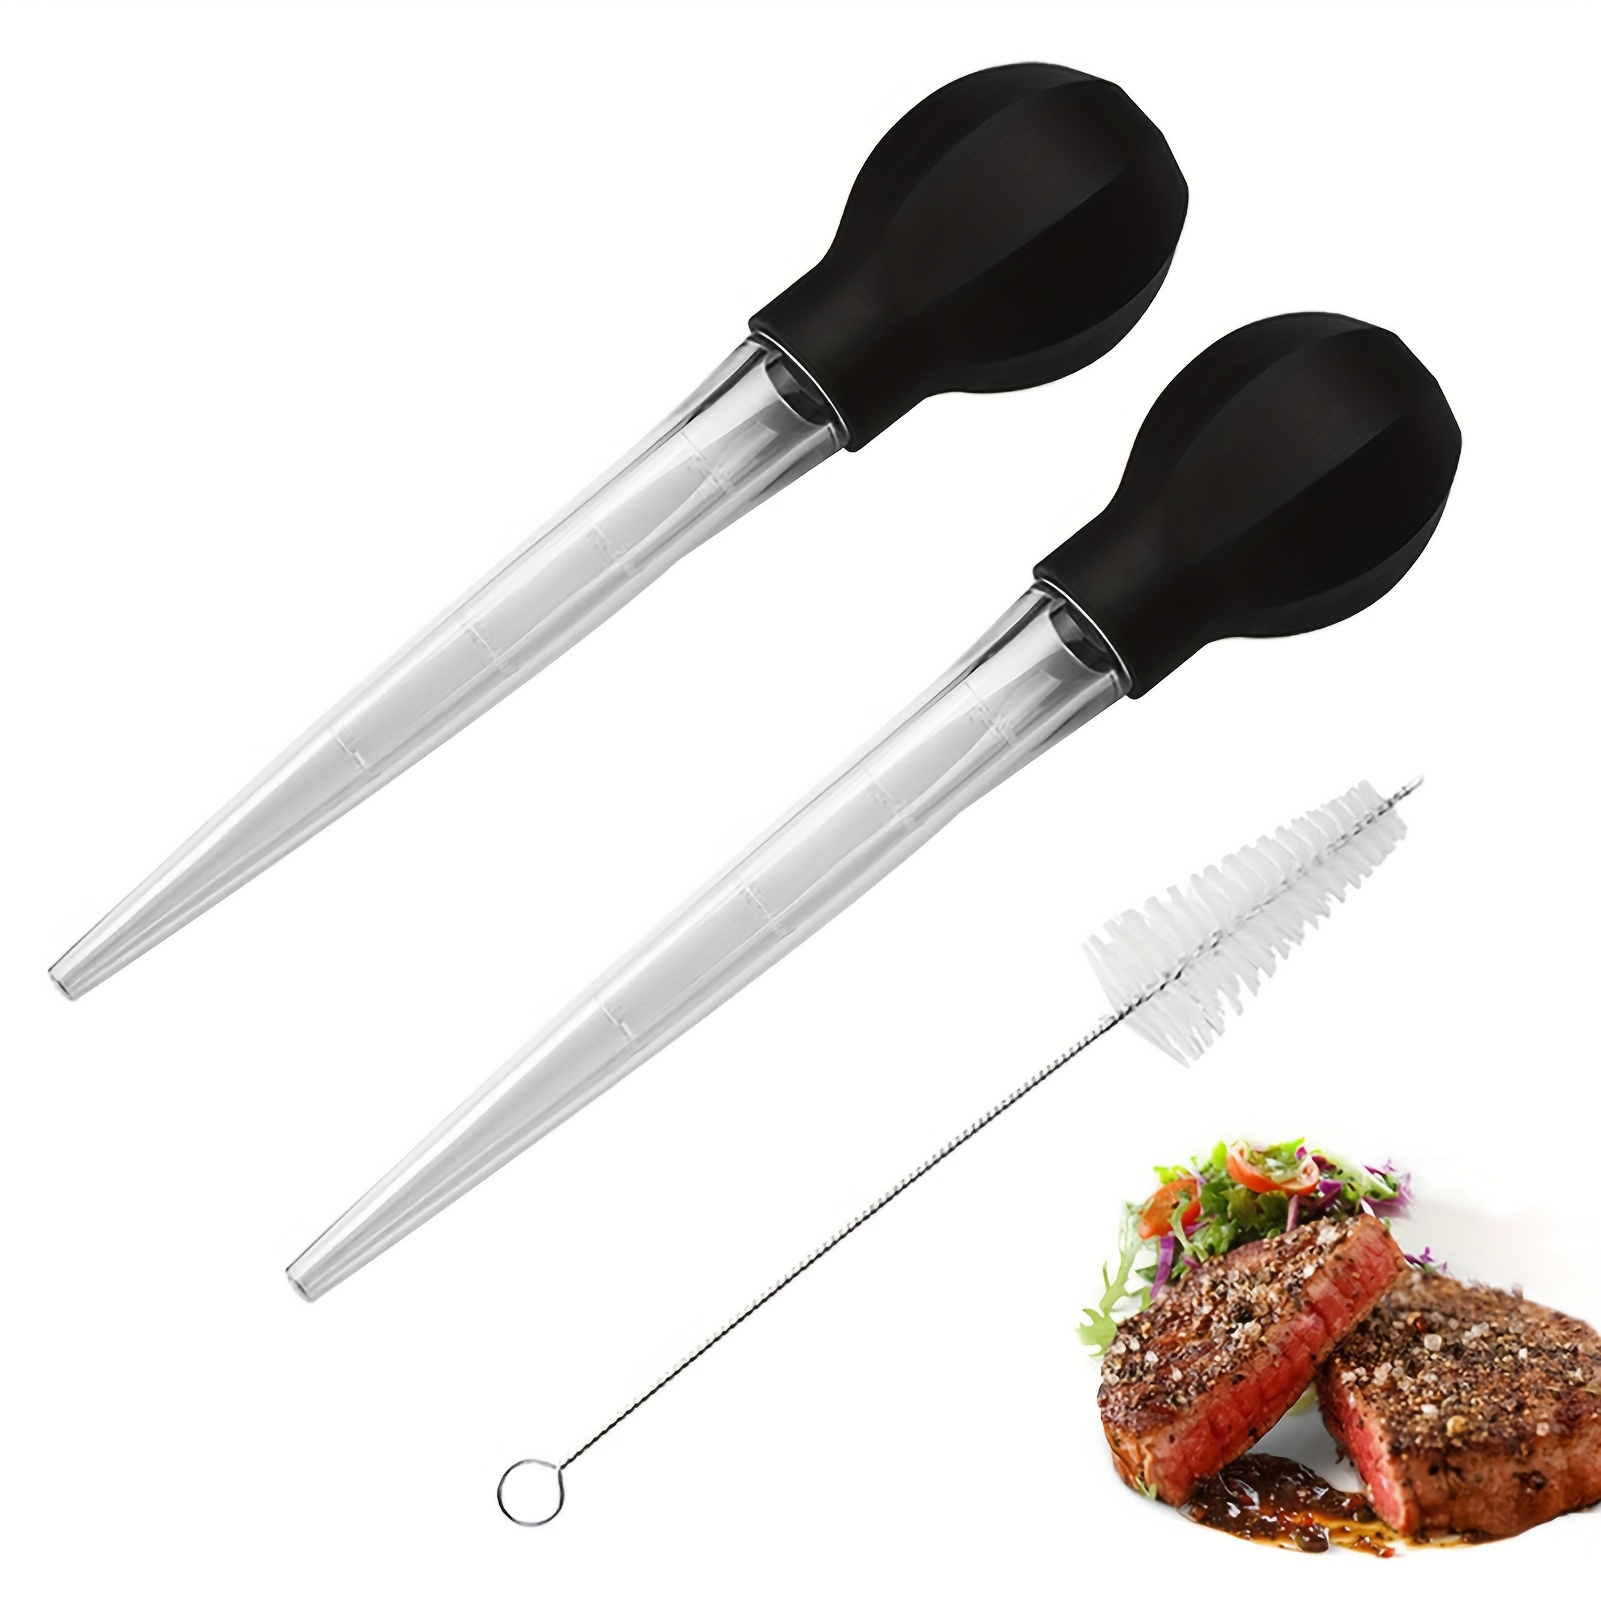  Zulay Kitchen Stainless Steel Turkey Baster for Cooking- Food  Grade Metal Turkey Baster Syringe with Silicone Suction Bulb - Turkey  Baster Large Size - Includes 2 Detachable Needles and Cleaning Brush